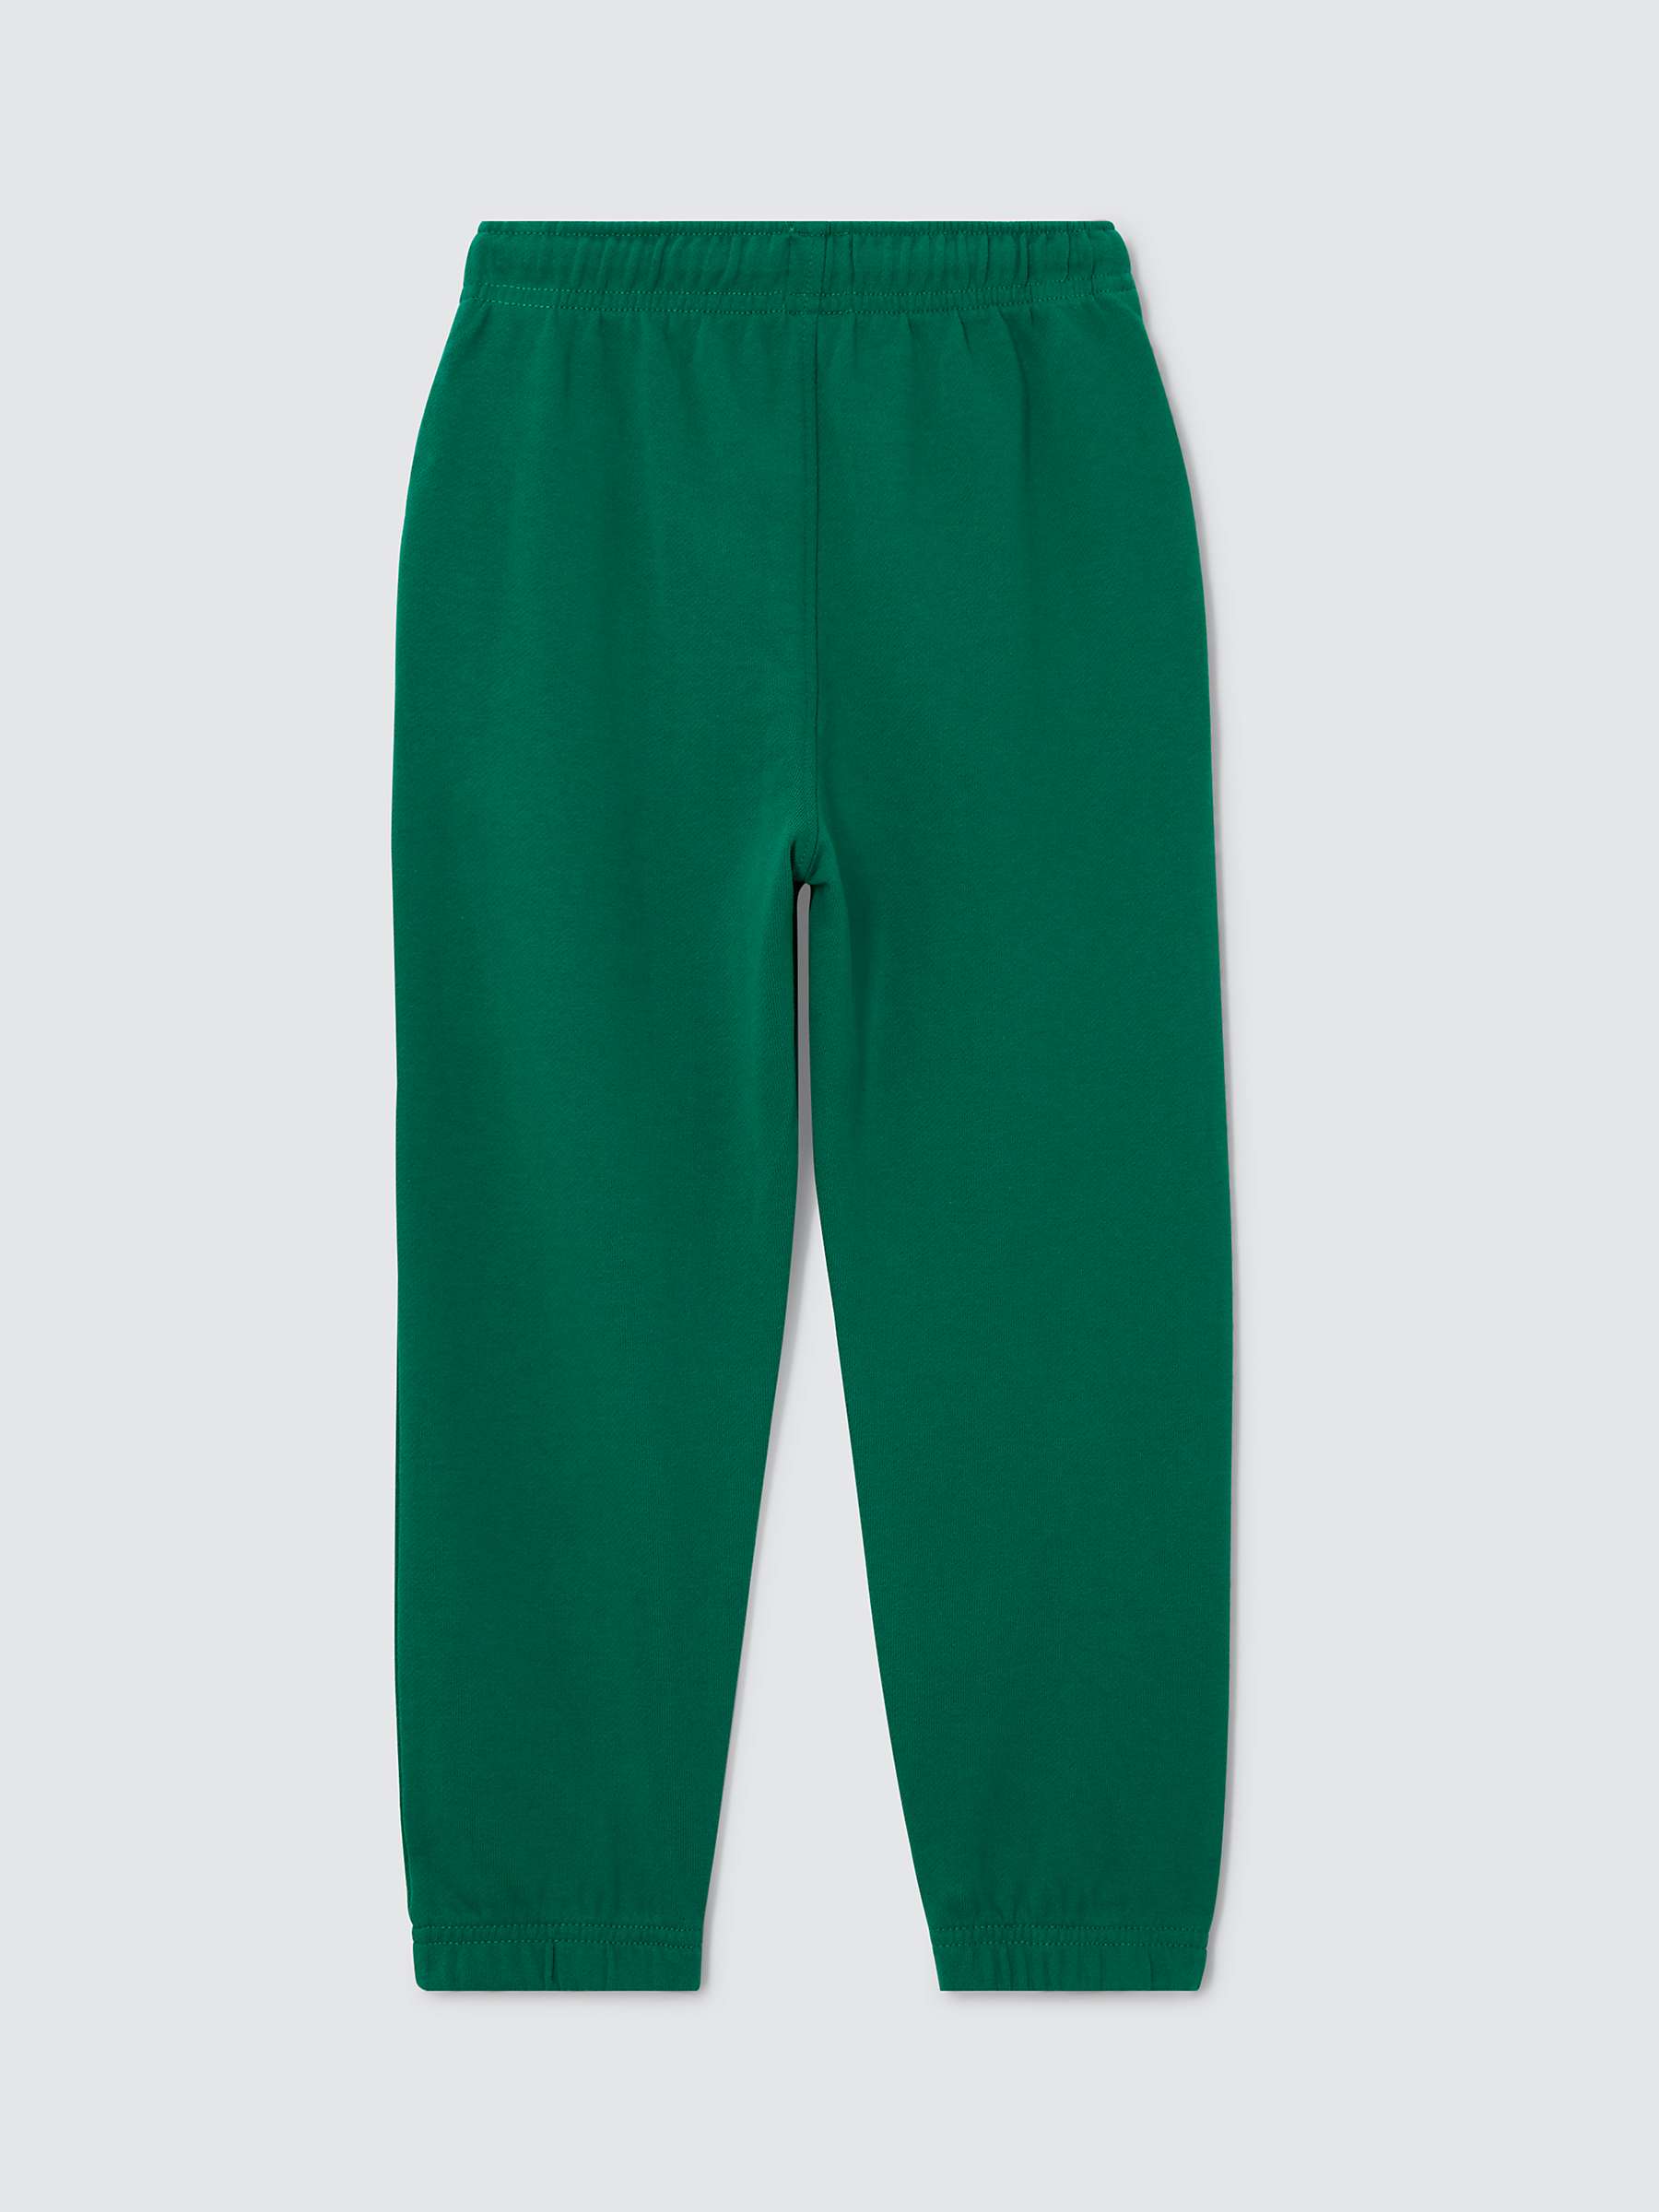 Buy John Lewis ANYDAY Kids' Cotton Joggers Online at johnlewis.com